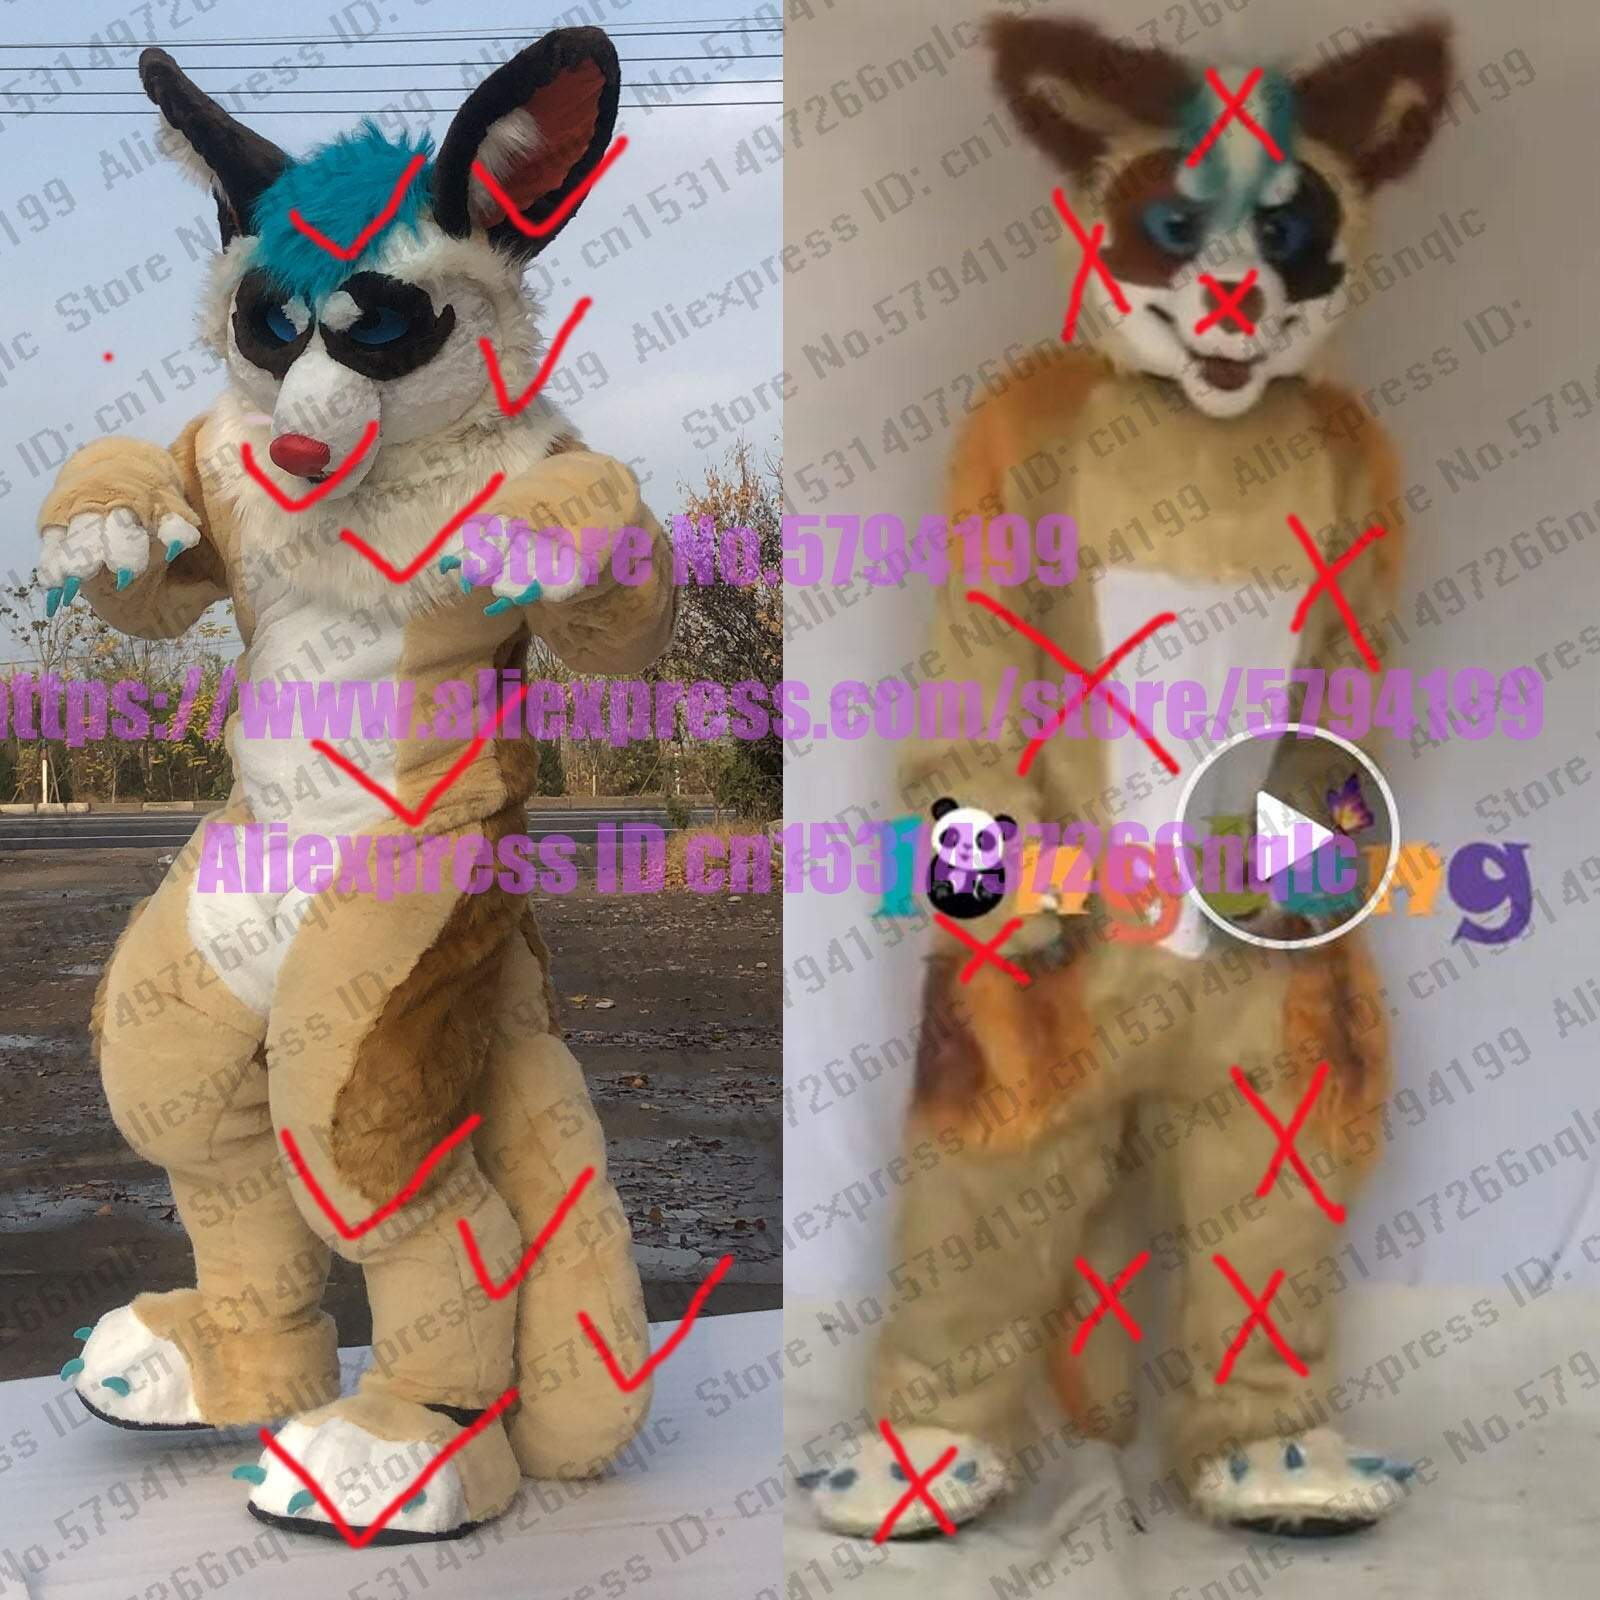 3-D Eyes  Fursuit Fullsuit Teen Green Hair Costumes Navy Blue Cat Dog Fox Furry Suit Custom For Child Adult -  by FurryMascot - 